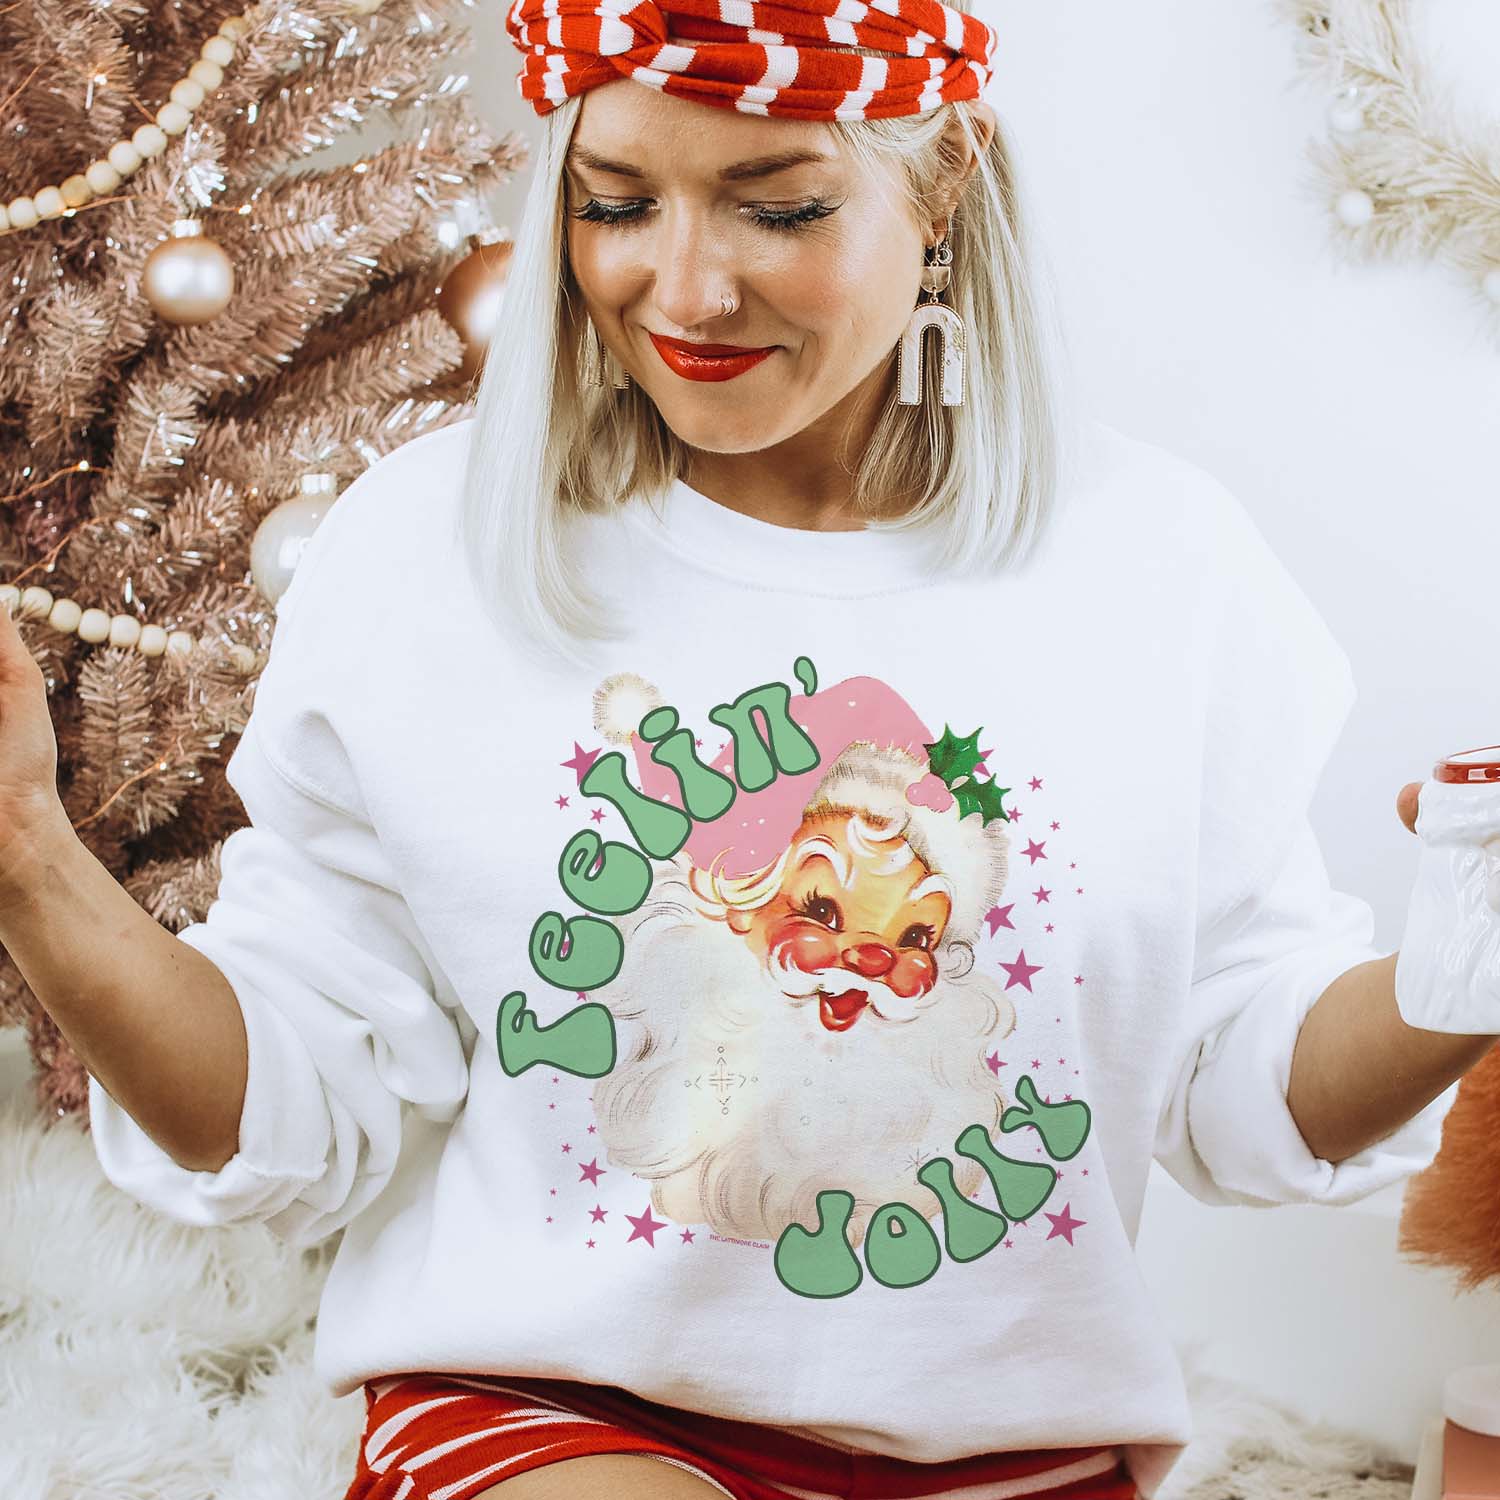 This white sweatshirt has a crew neckline, long sleeves, and a hand drawn graphic of a vintage Santa Clause, pink stars around him, and the words "Feelin' Jolly" in a fun, green bubble type of font. The Santa is also wearing a light pink Christmas hat. The tee is shown pictured here modeled with a pair of red and white striped shorts and matching headband, along with white dangle earrings. 